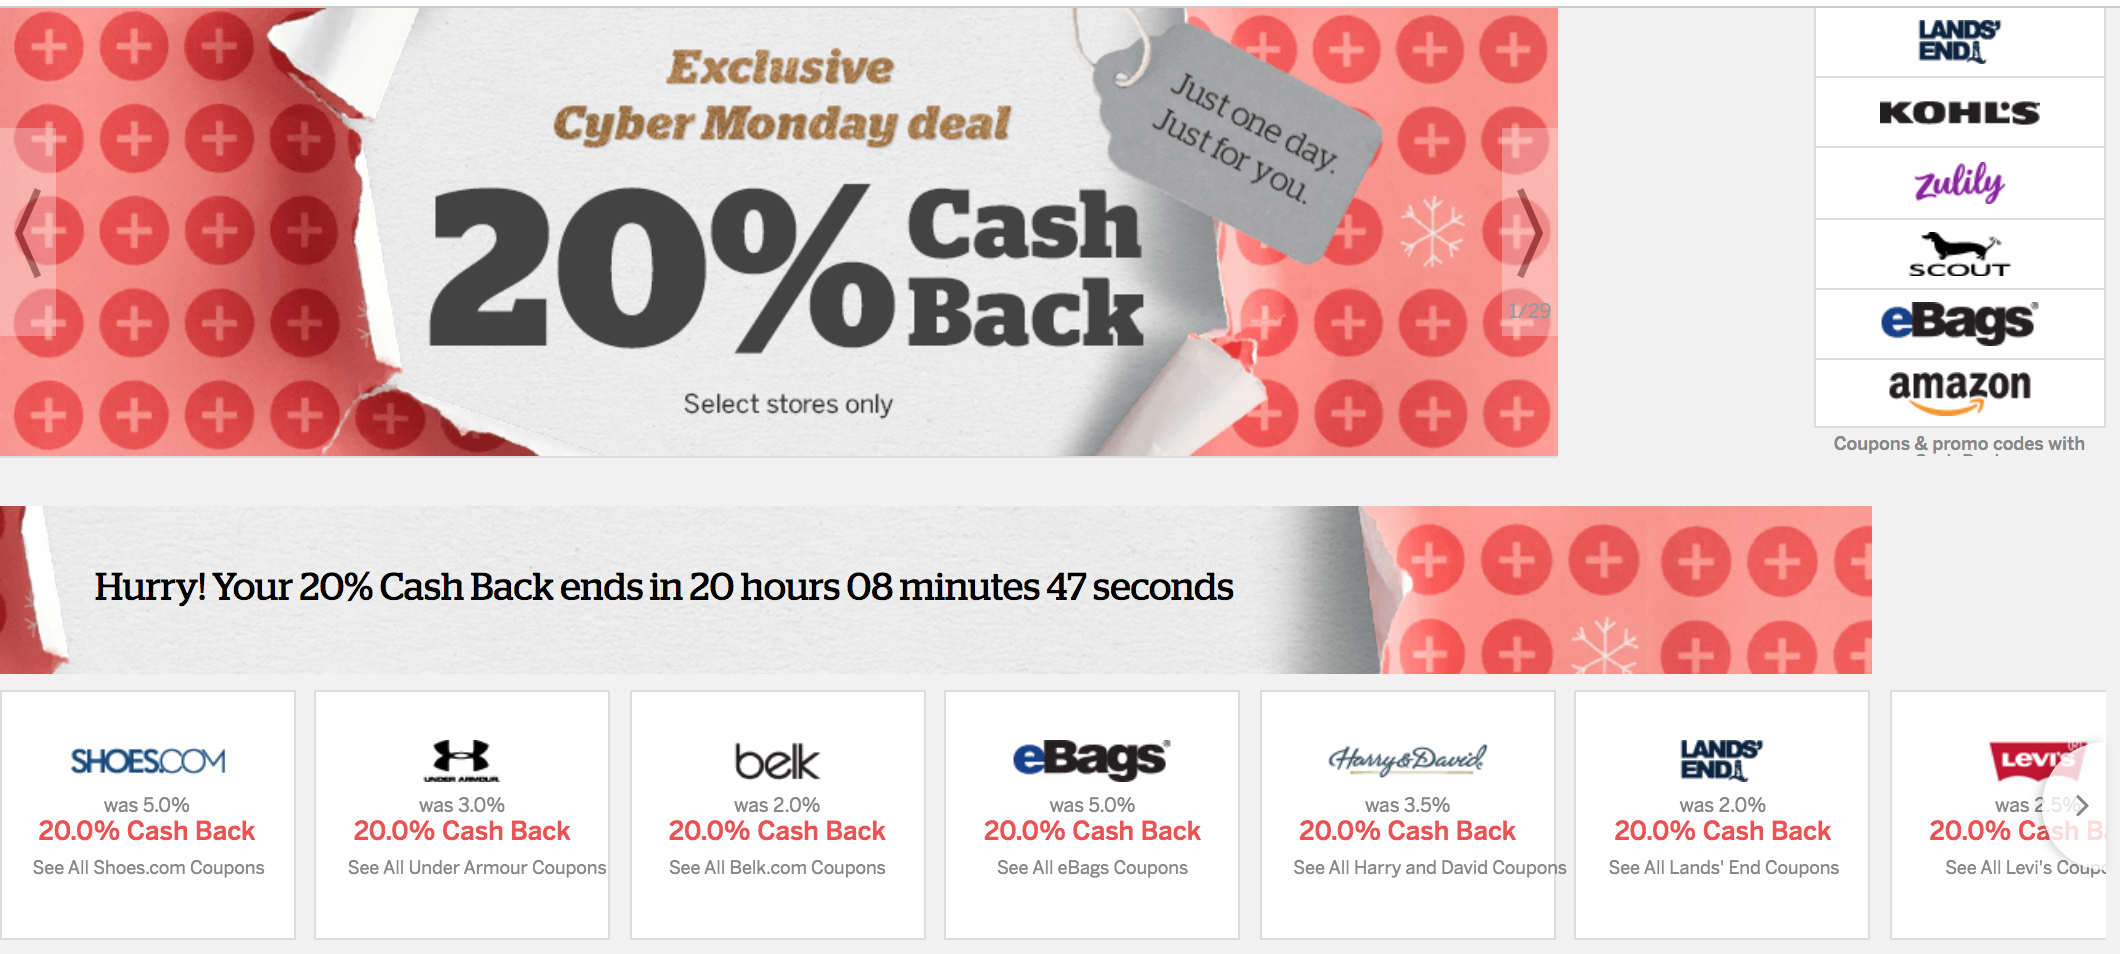 Rakuten Cyber Monday is giving you up to 20% cash back for the Ebates Cyber Monday promotion